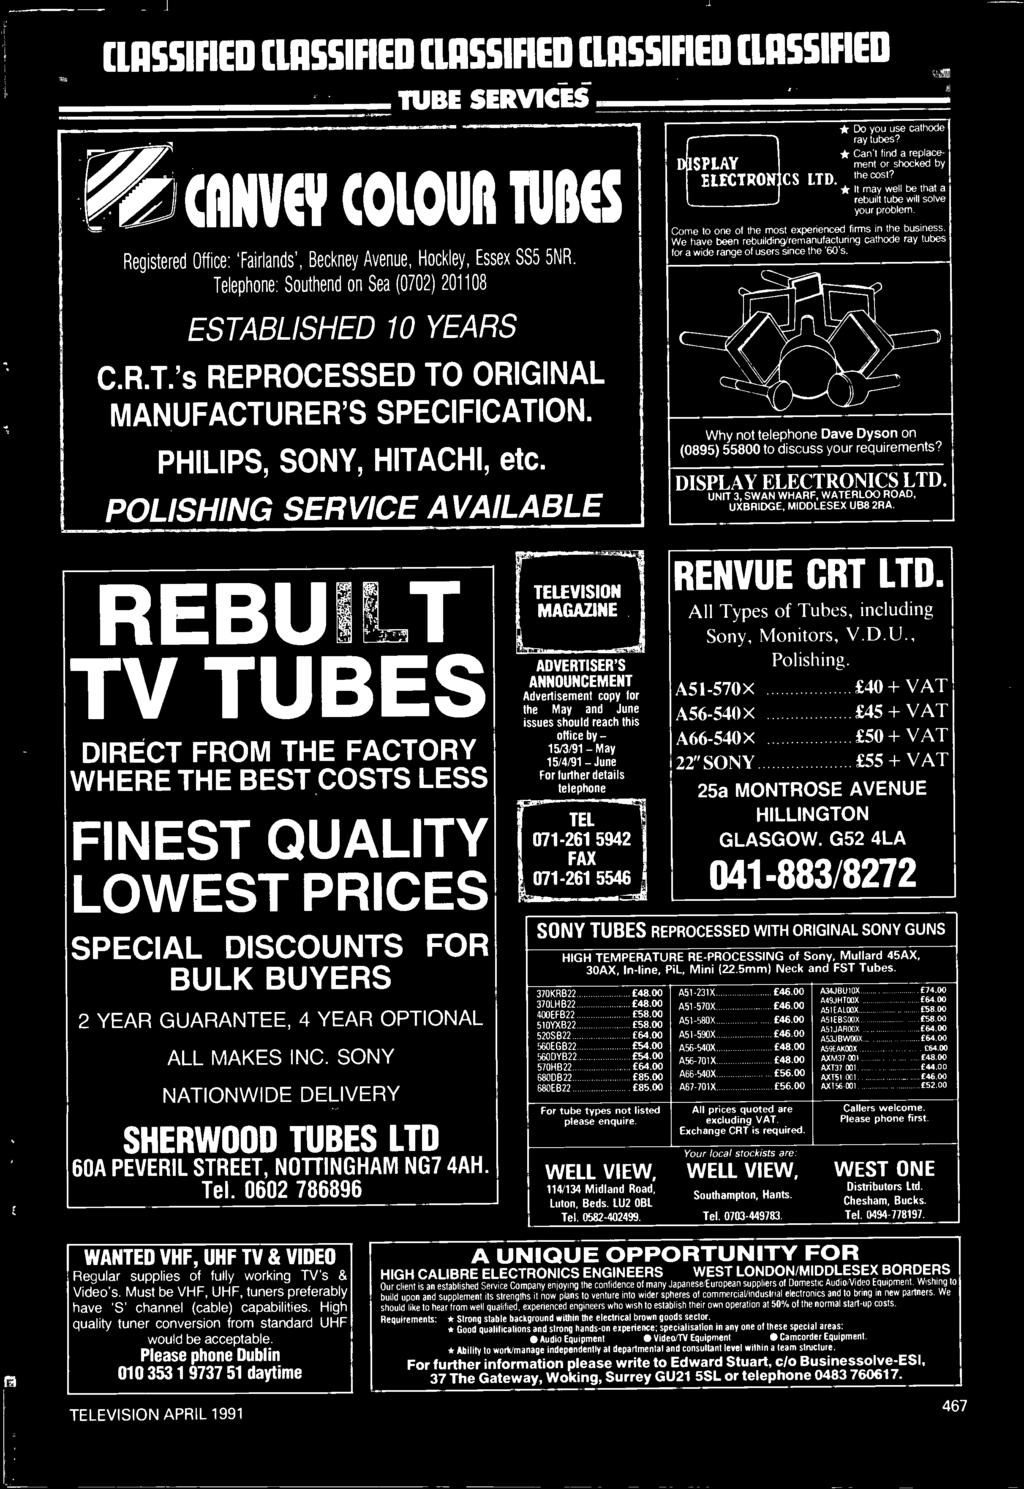 * It may welt be that a rebuilt tube will solve your problem. Come to one of the most experienced firms in the business.